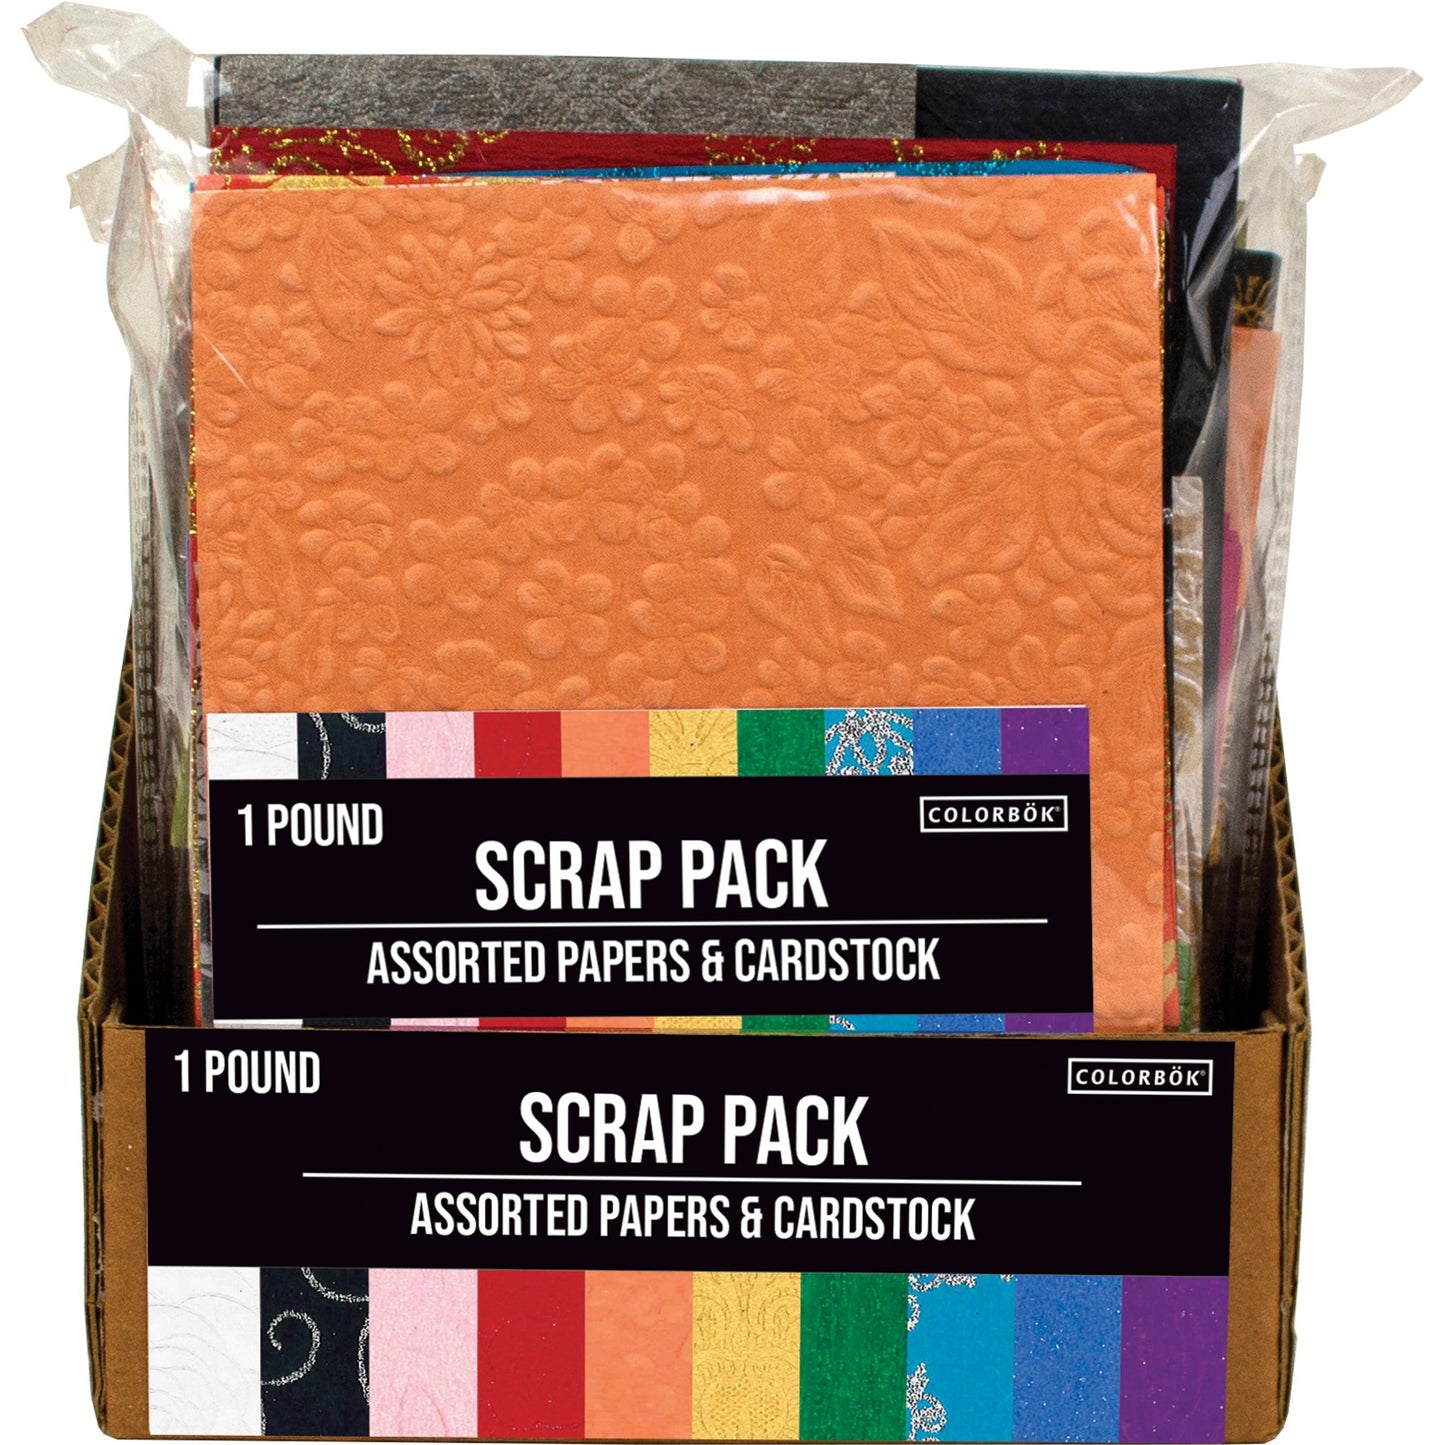 Colorbok Scrap Pack Paper 1lb Various Sizes-Assorted